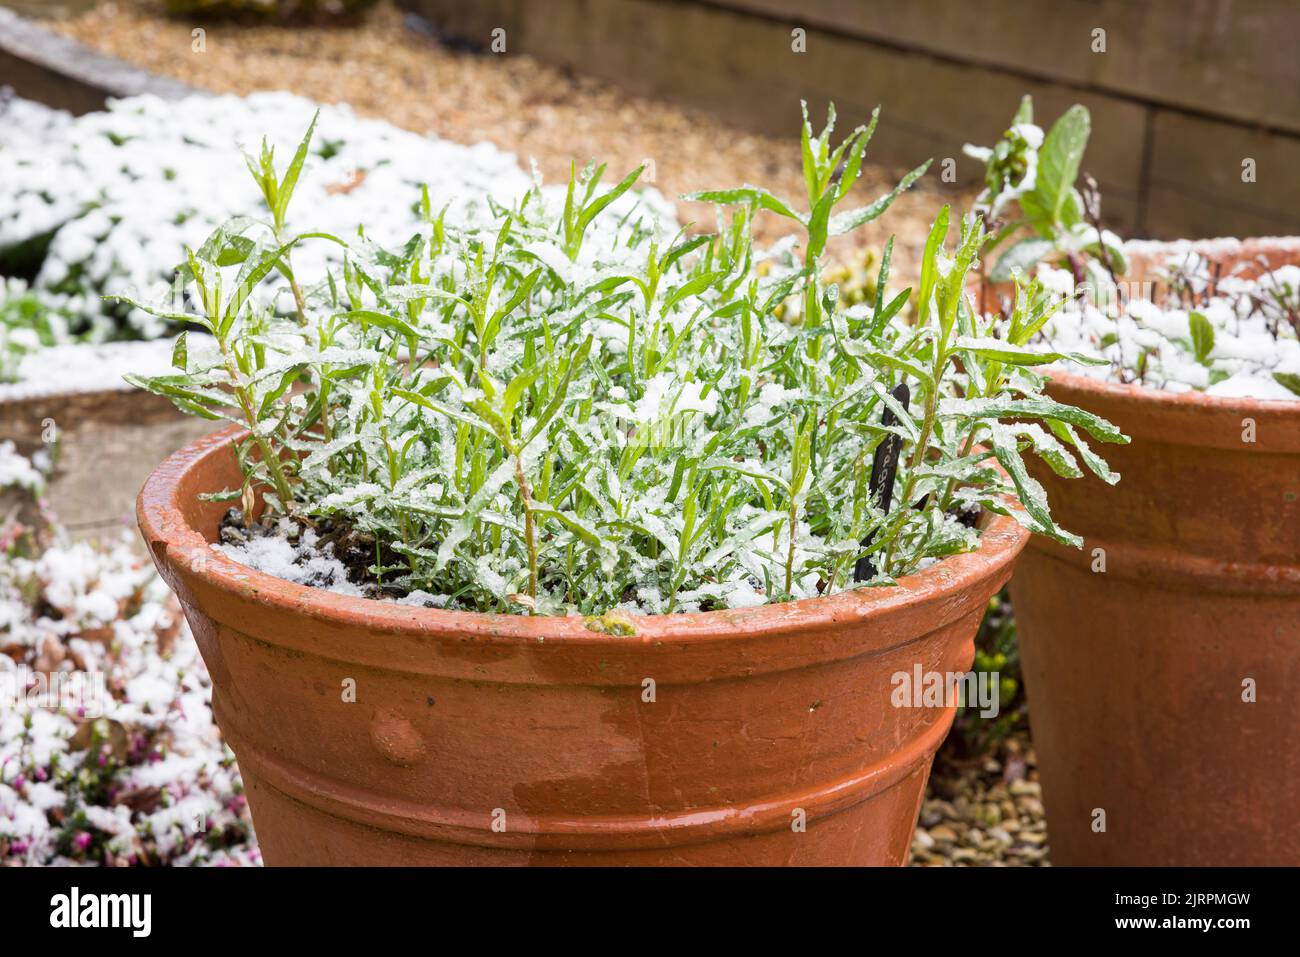 French tarragon (artemisia dracunculus) herb plant in a terracotta plant in late winter or early spring, covered in snow in a UK garden Stock Photo